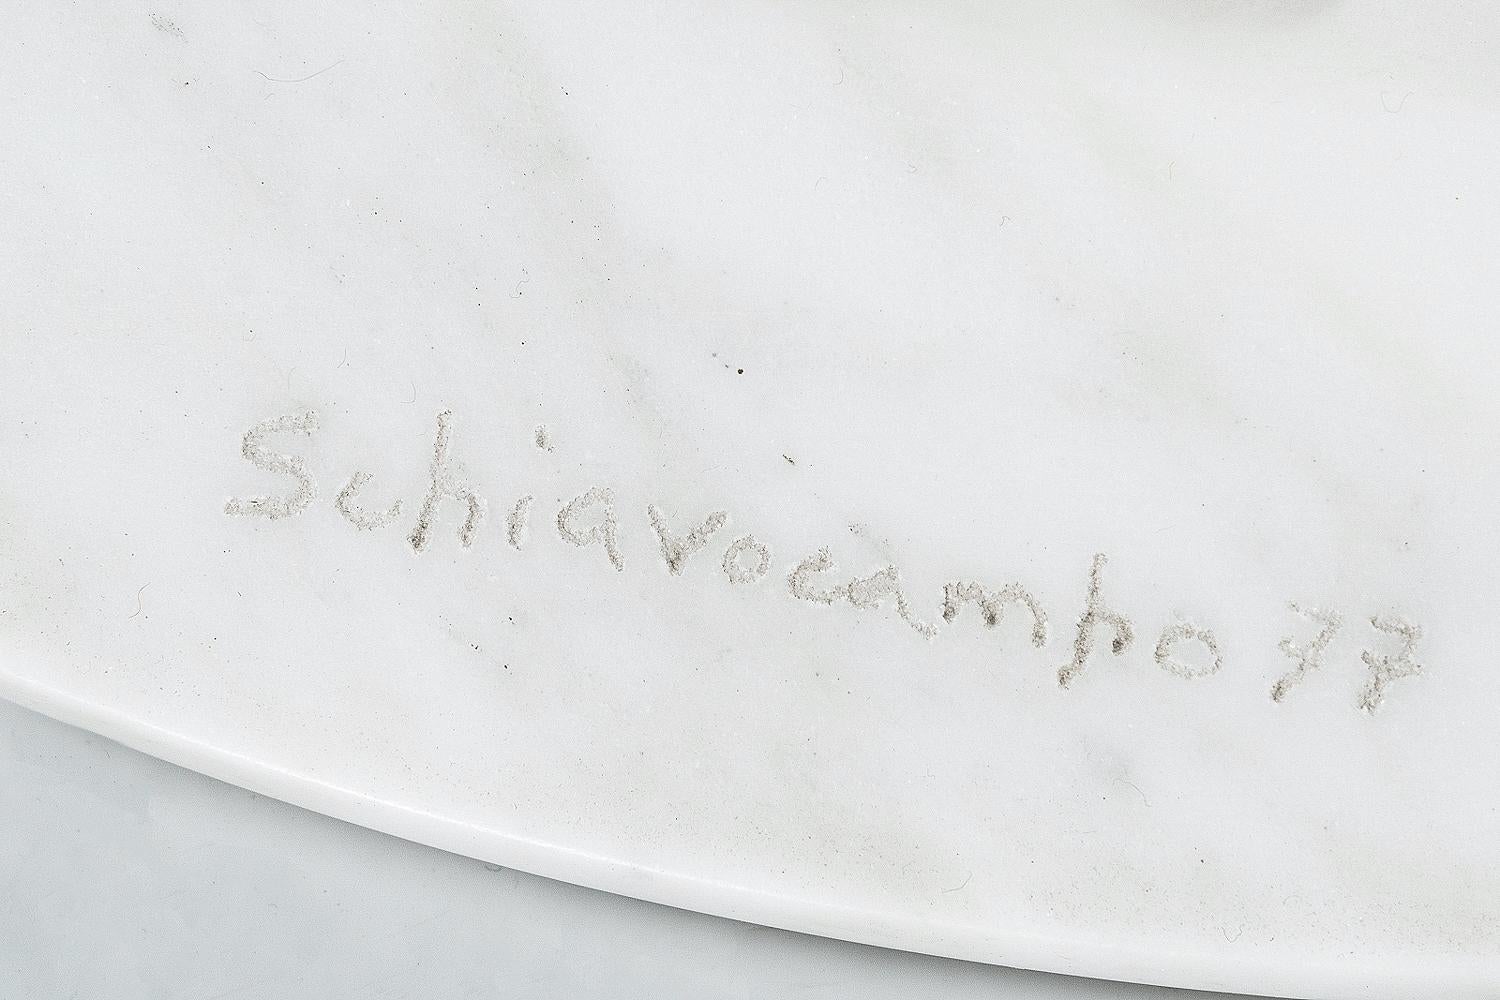 Paolo Schiavocampo Marble Sculpture Italy 1977 6